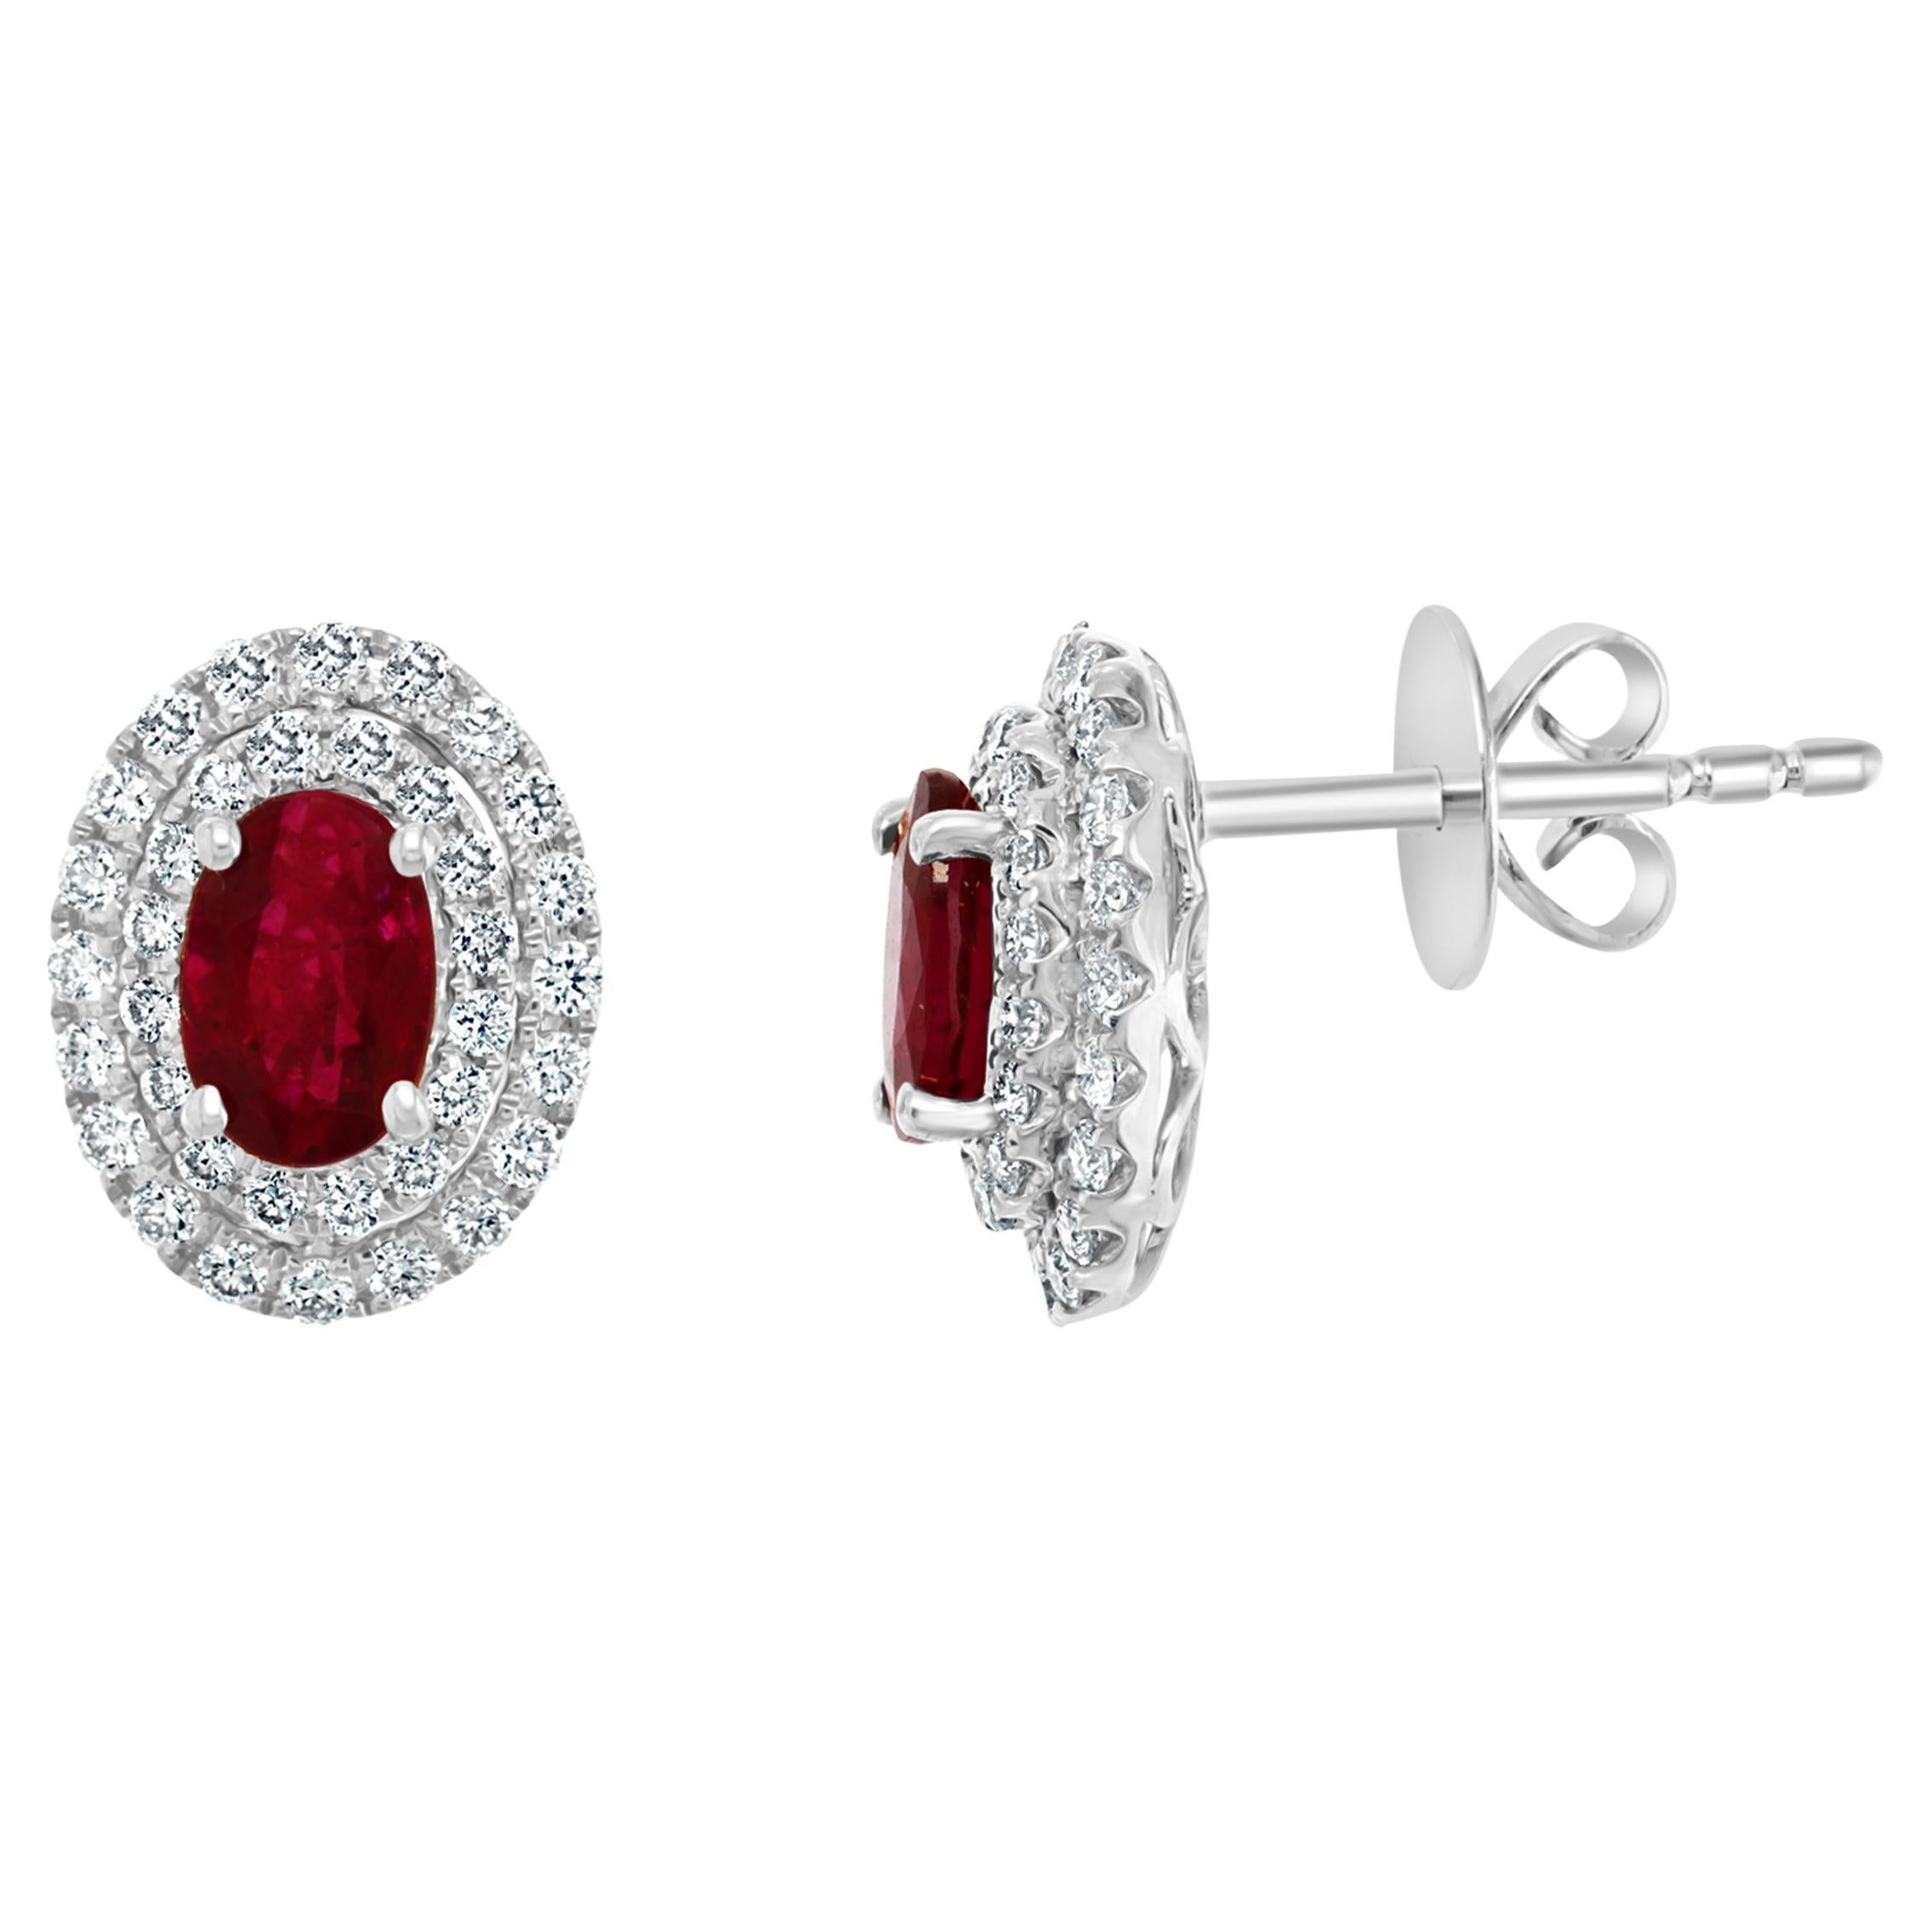 0.98 Carat Oval Cut Ruby and Diamond Stud Earrings in 18K White Gold